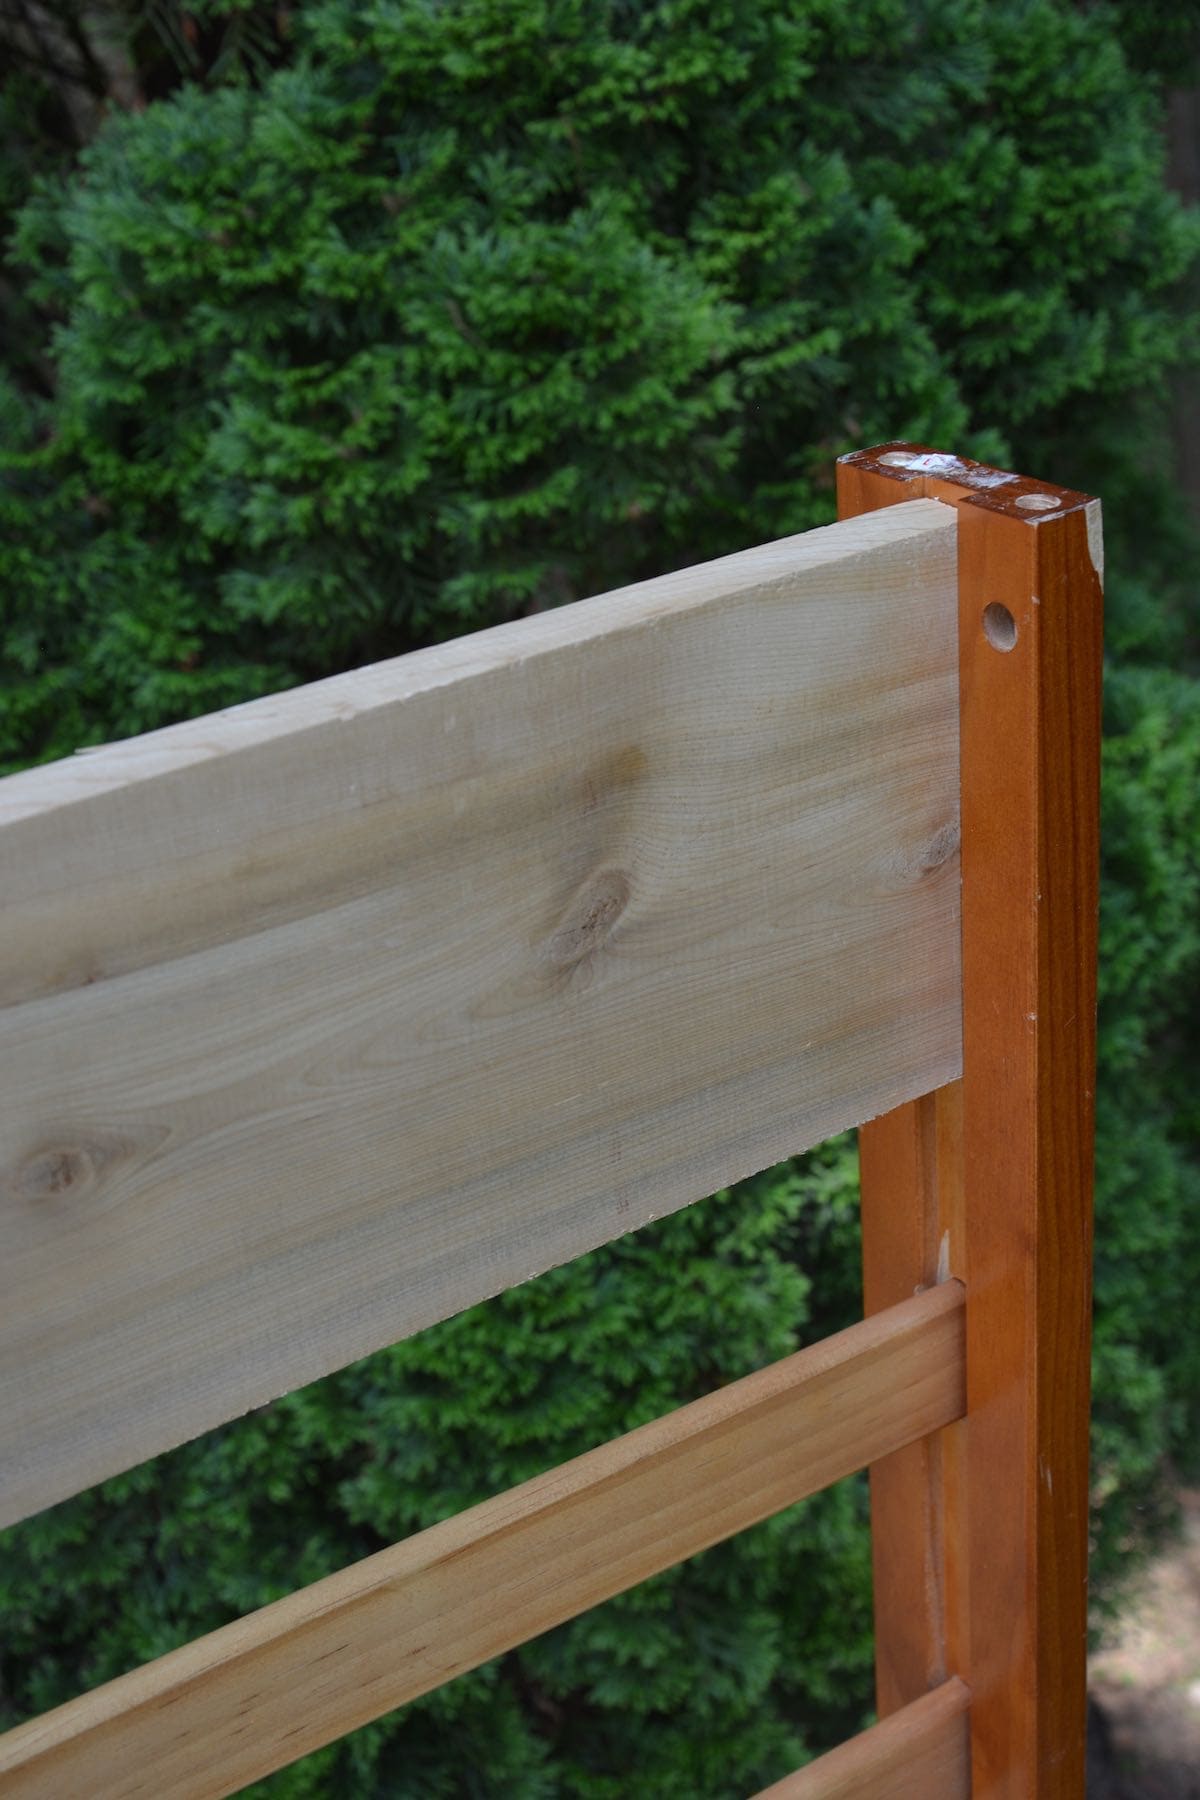 Repurposed toddler bed: What to do with an old toddler bed - Add cedar to make a DIY garden bench. - Thrift Diving